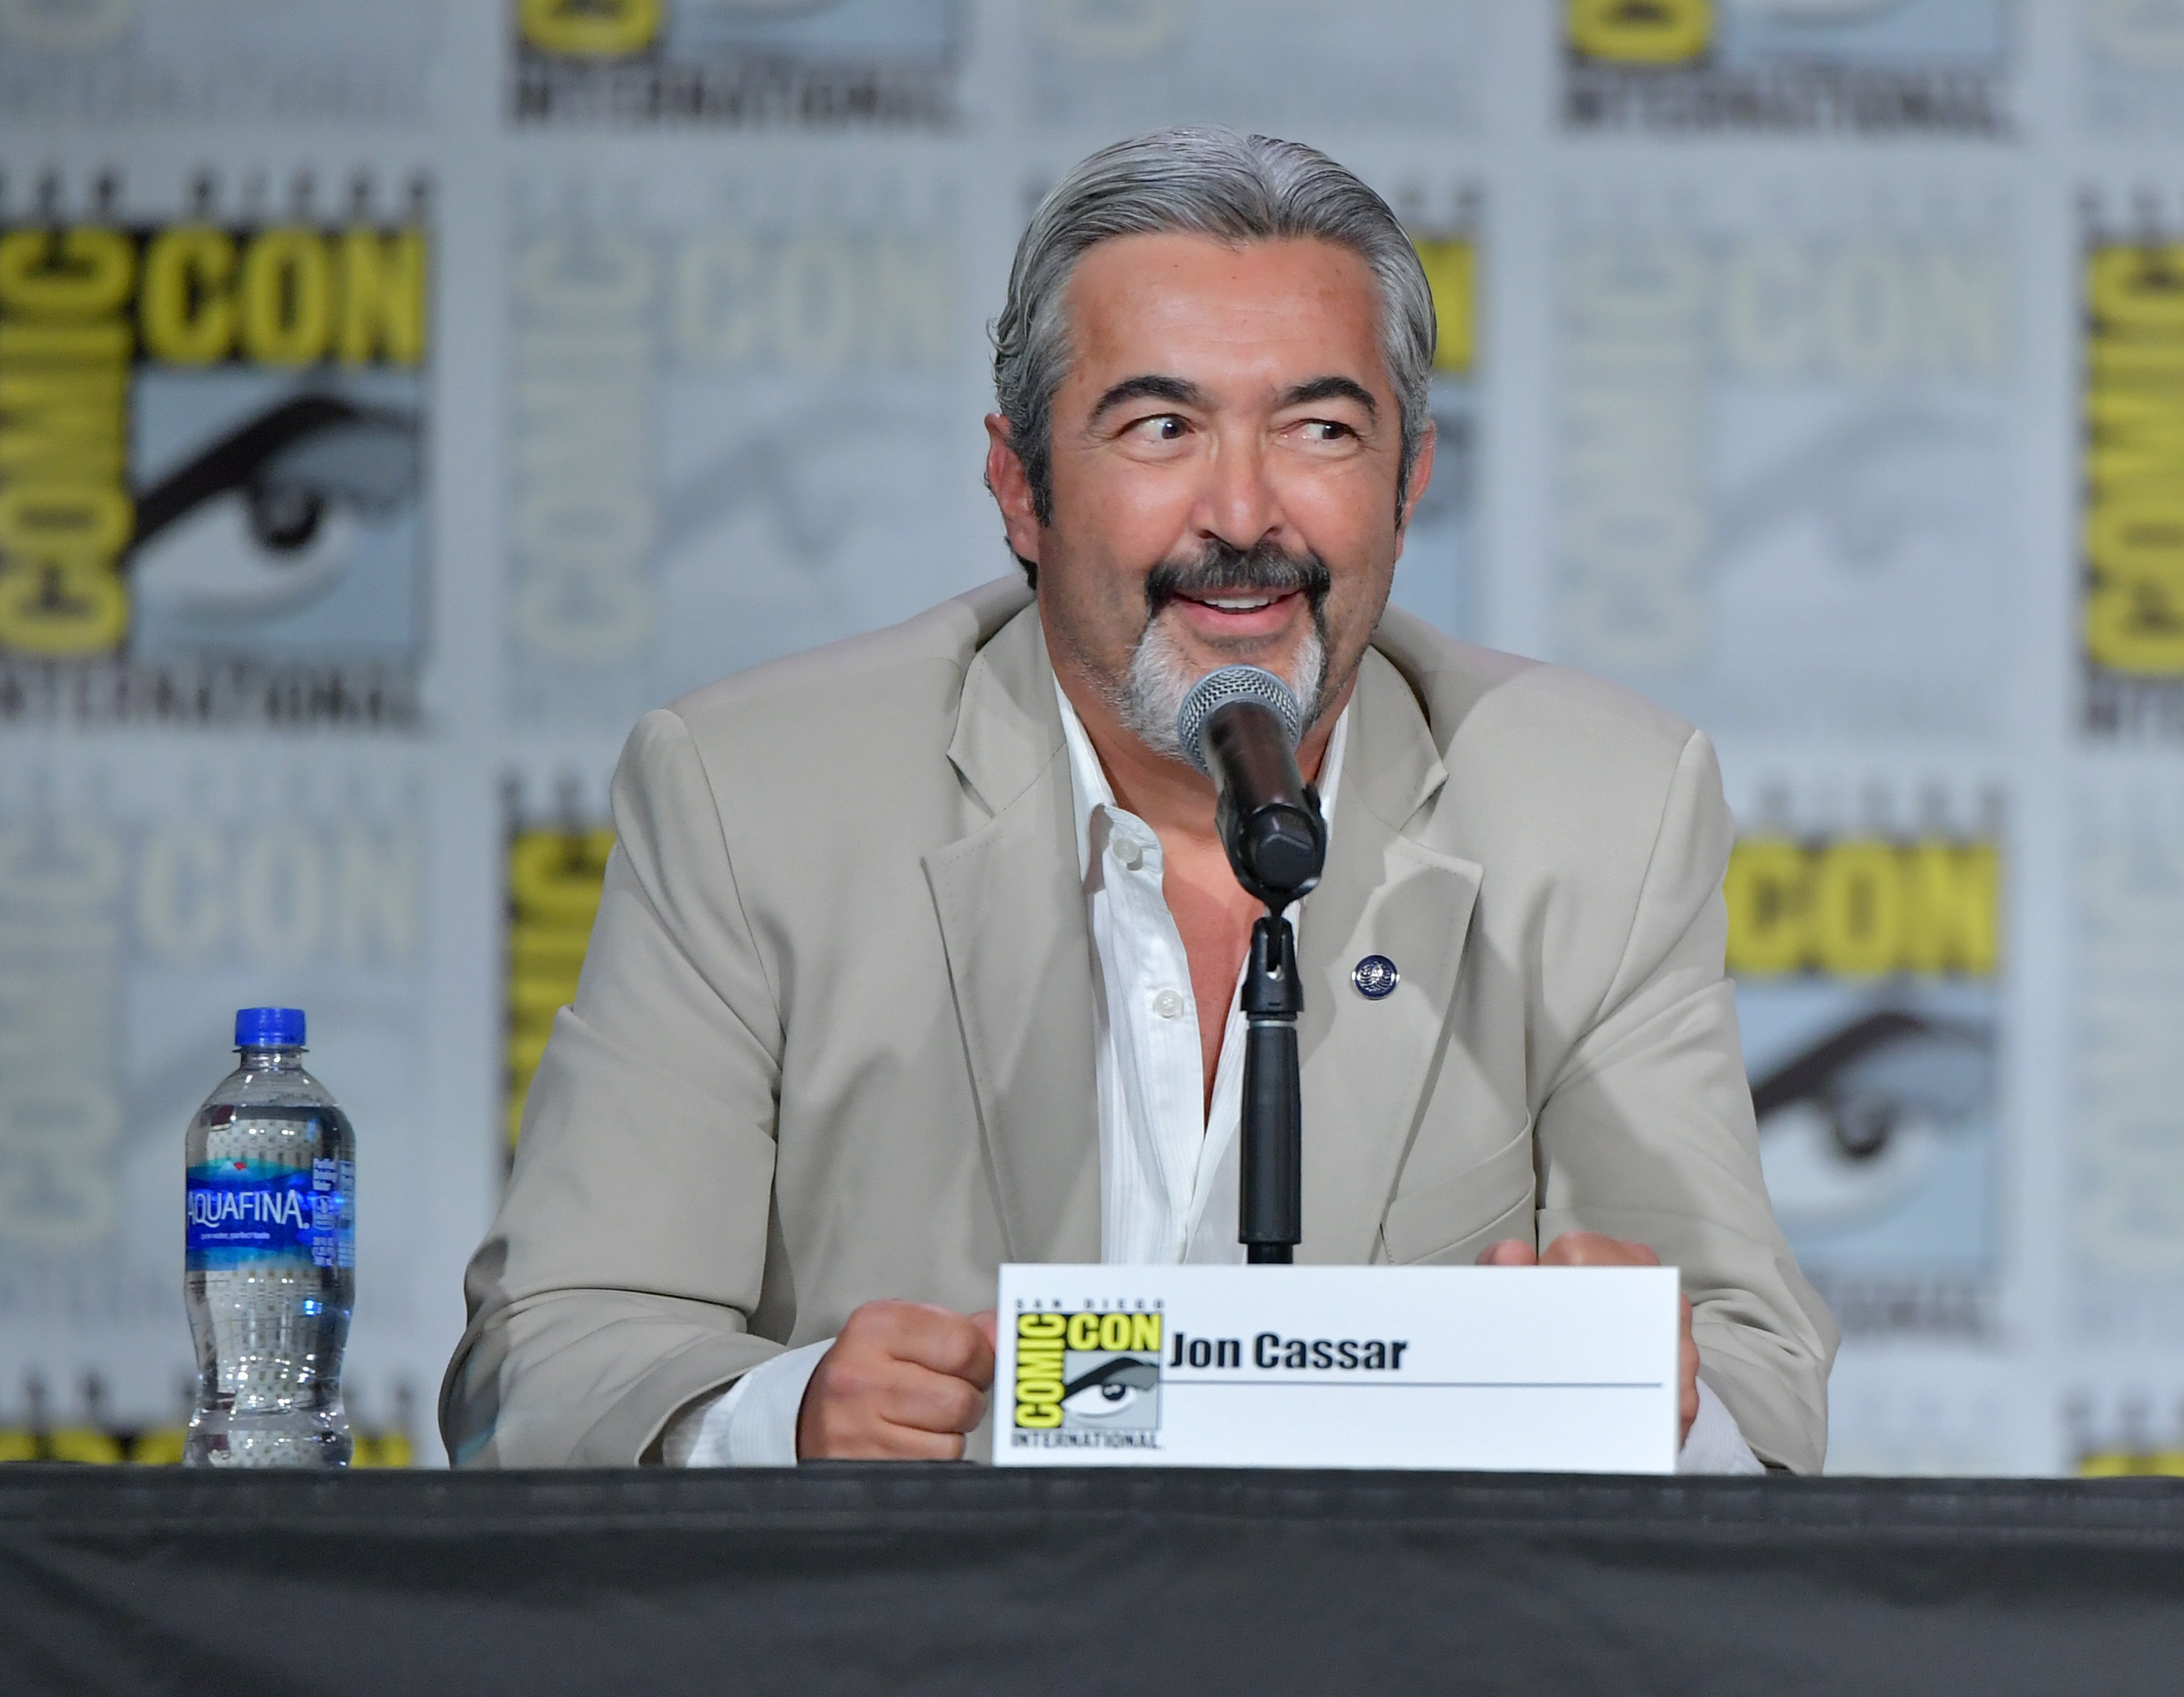 on Cassar speaks at "The Orville" Panel during 2019 Comic-Con International at San Diego Convention Center on July 20, 2019 in San Diego, California. | Source: Getty Images